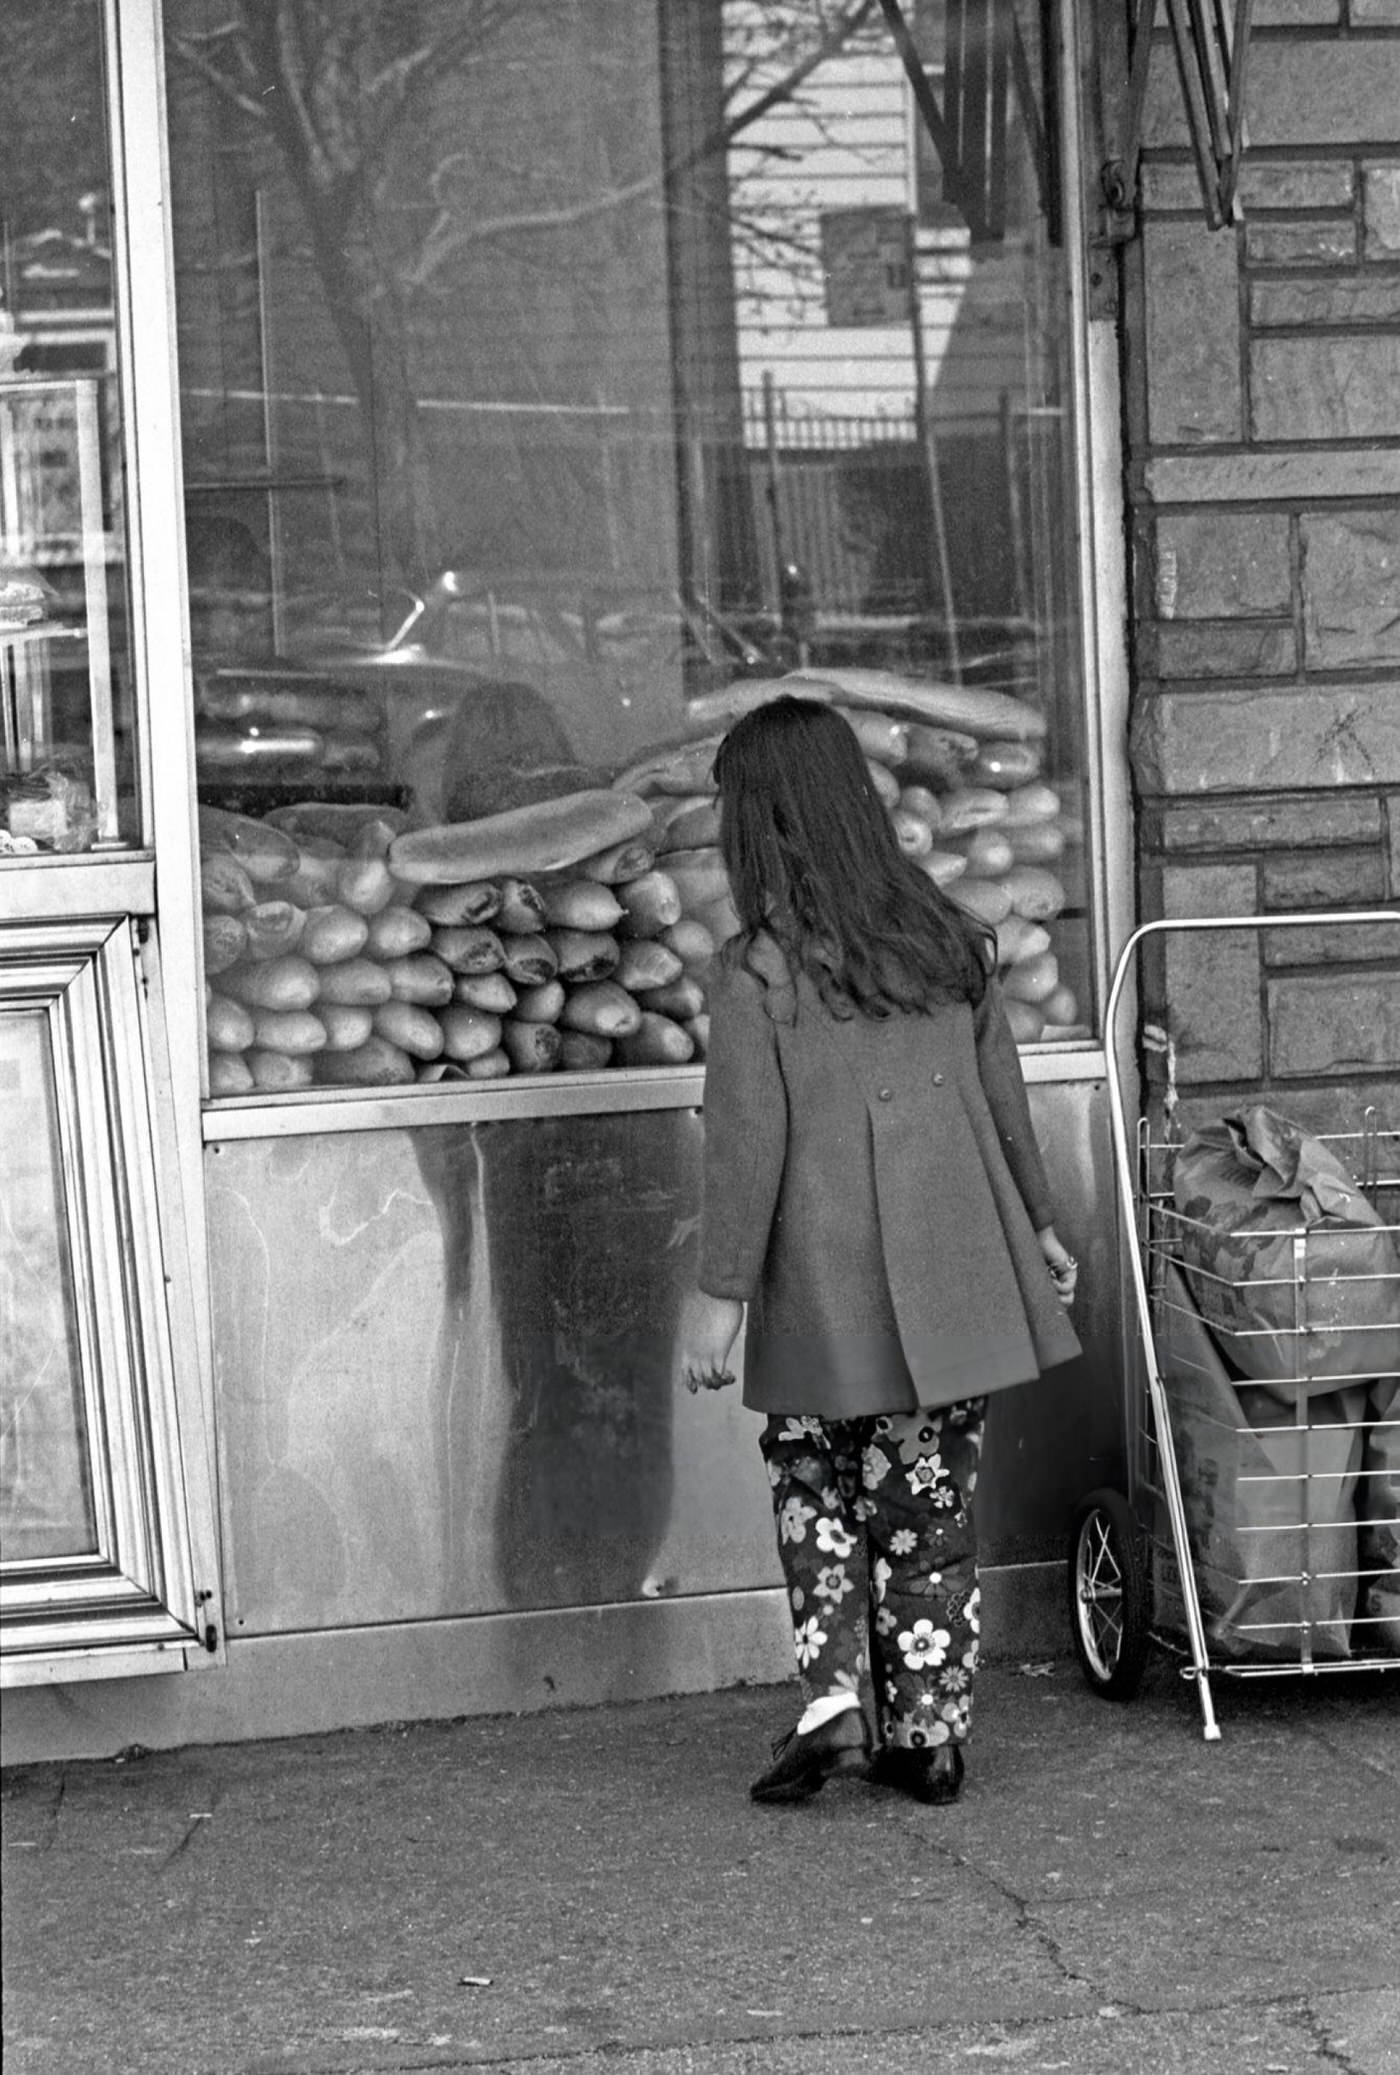 A Young Girl Looking At Loaves Of Italian Bread Through The Window Of A Bakery Shop On 108Th Street In Queens' Corona Neighborhood, 1970S.